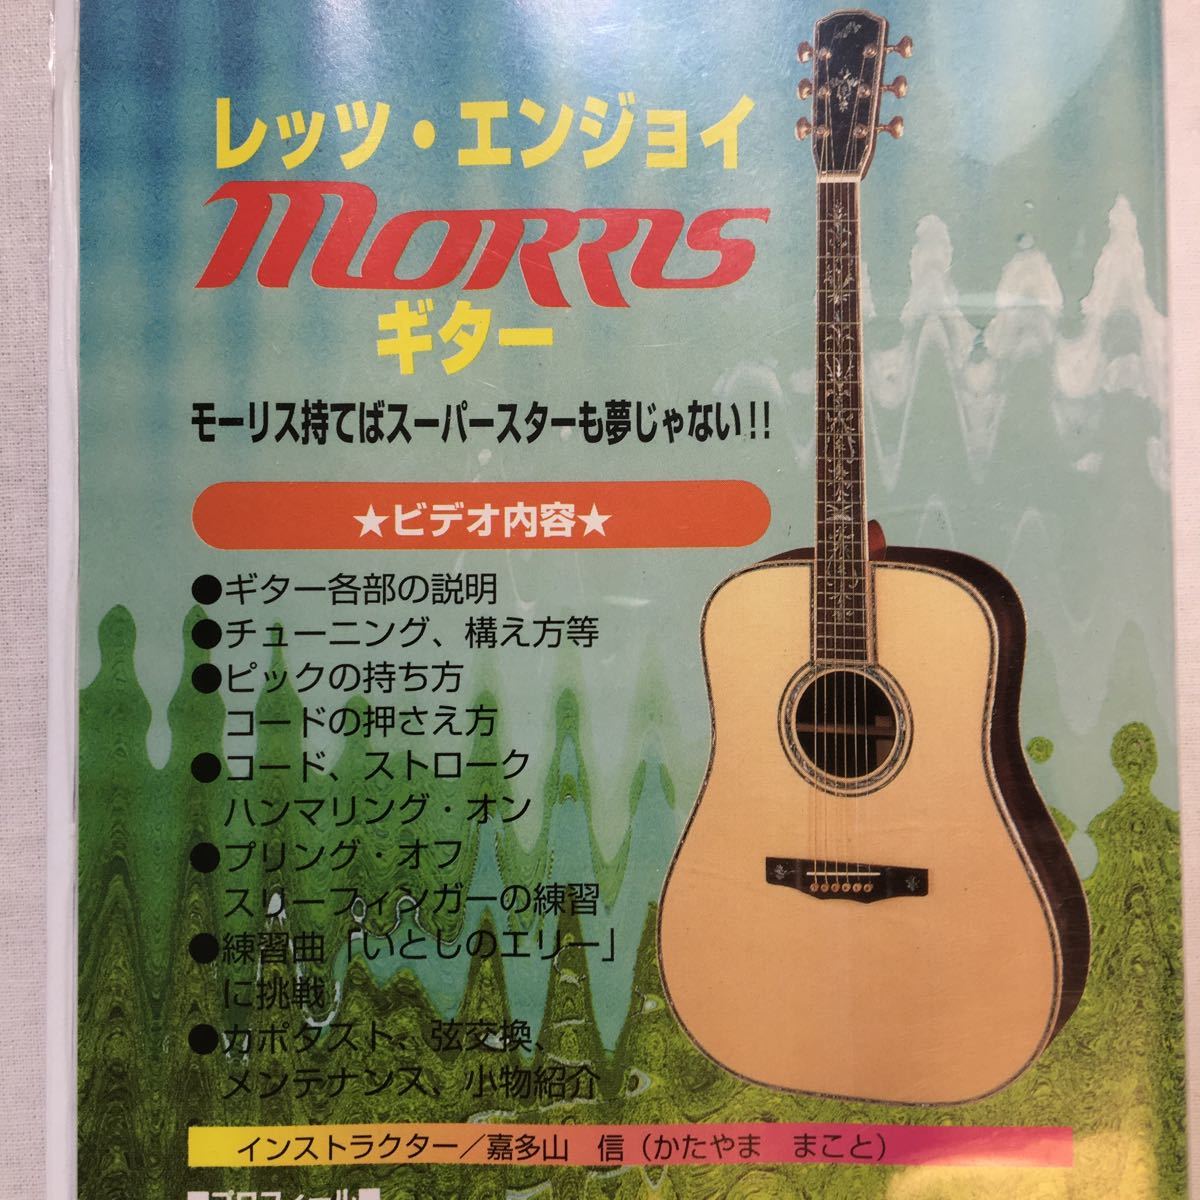 zvd-01! let's * dark red .i Morris guitar corporation moli large la plan ( editing ),. many mountain confidence ( editing ) [VHS] video compilation time 60 minute 2001/1/1